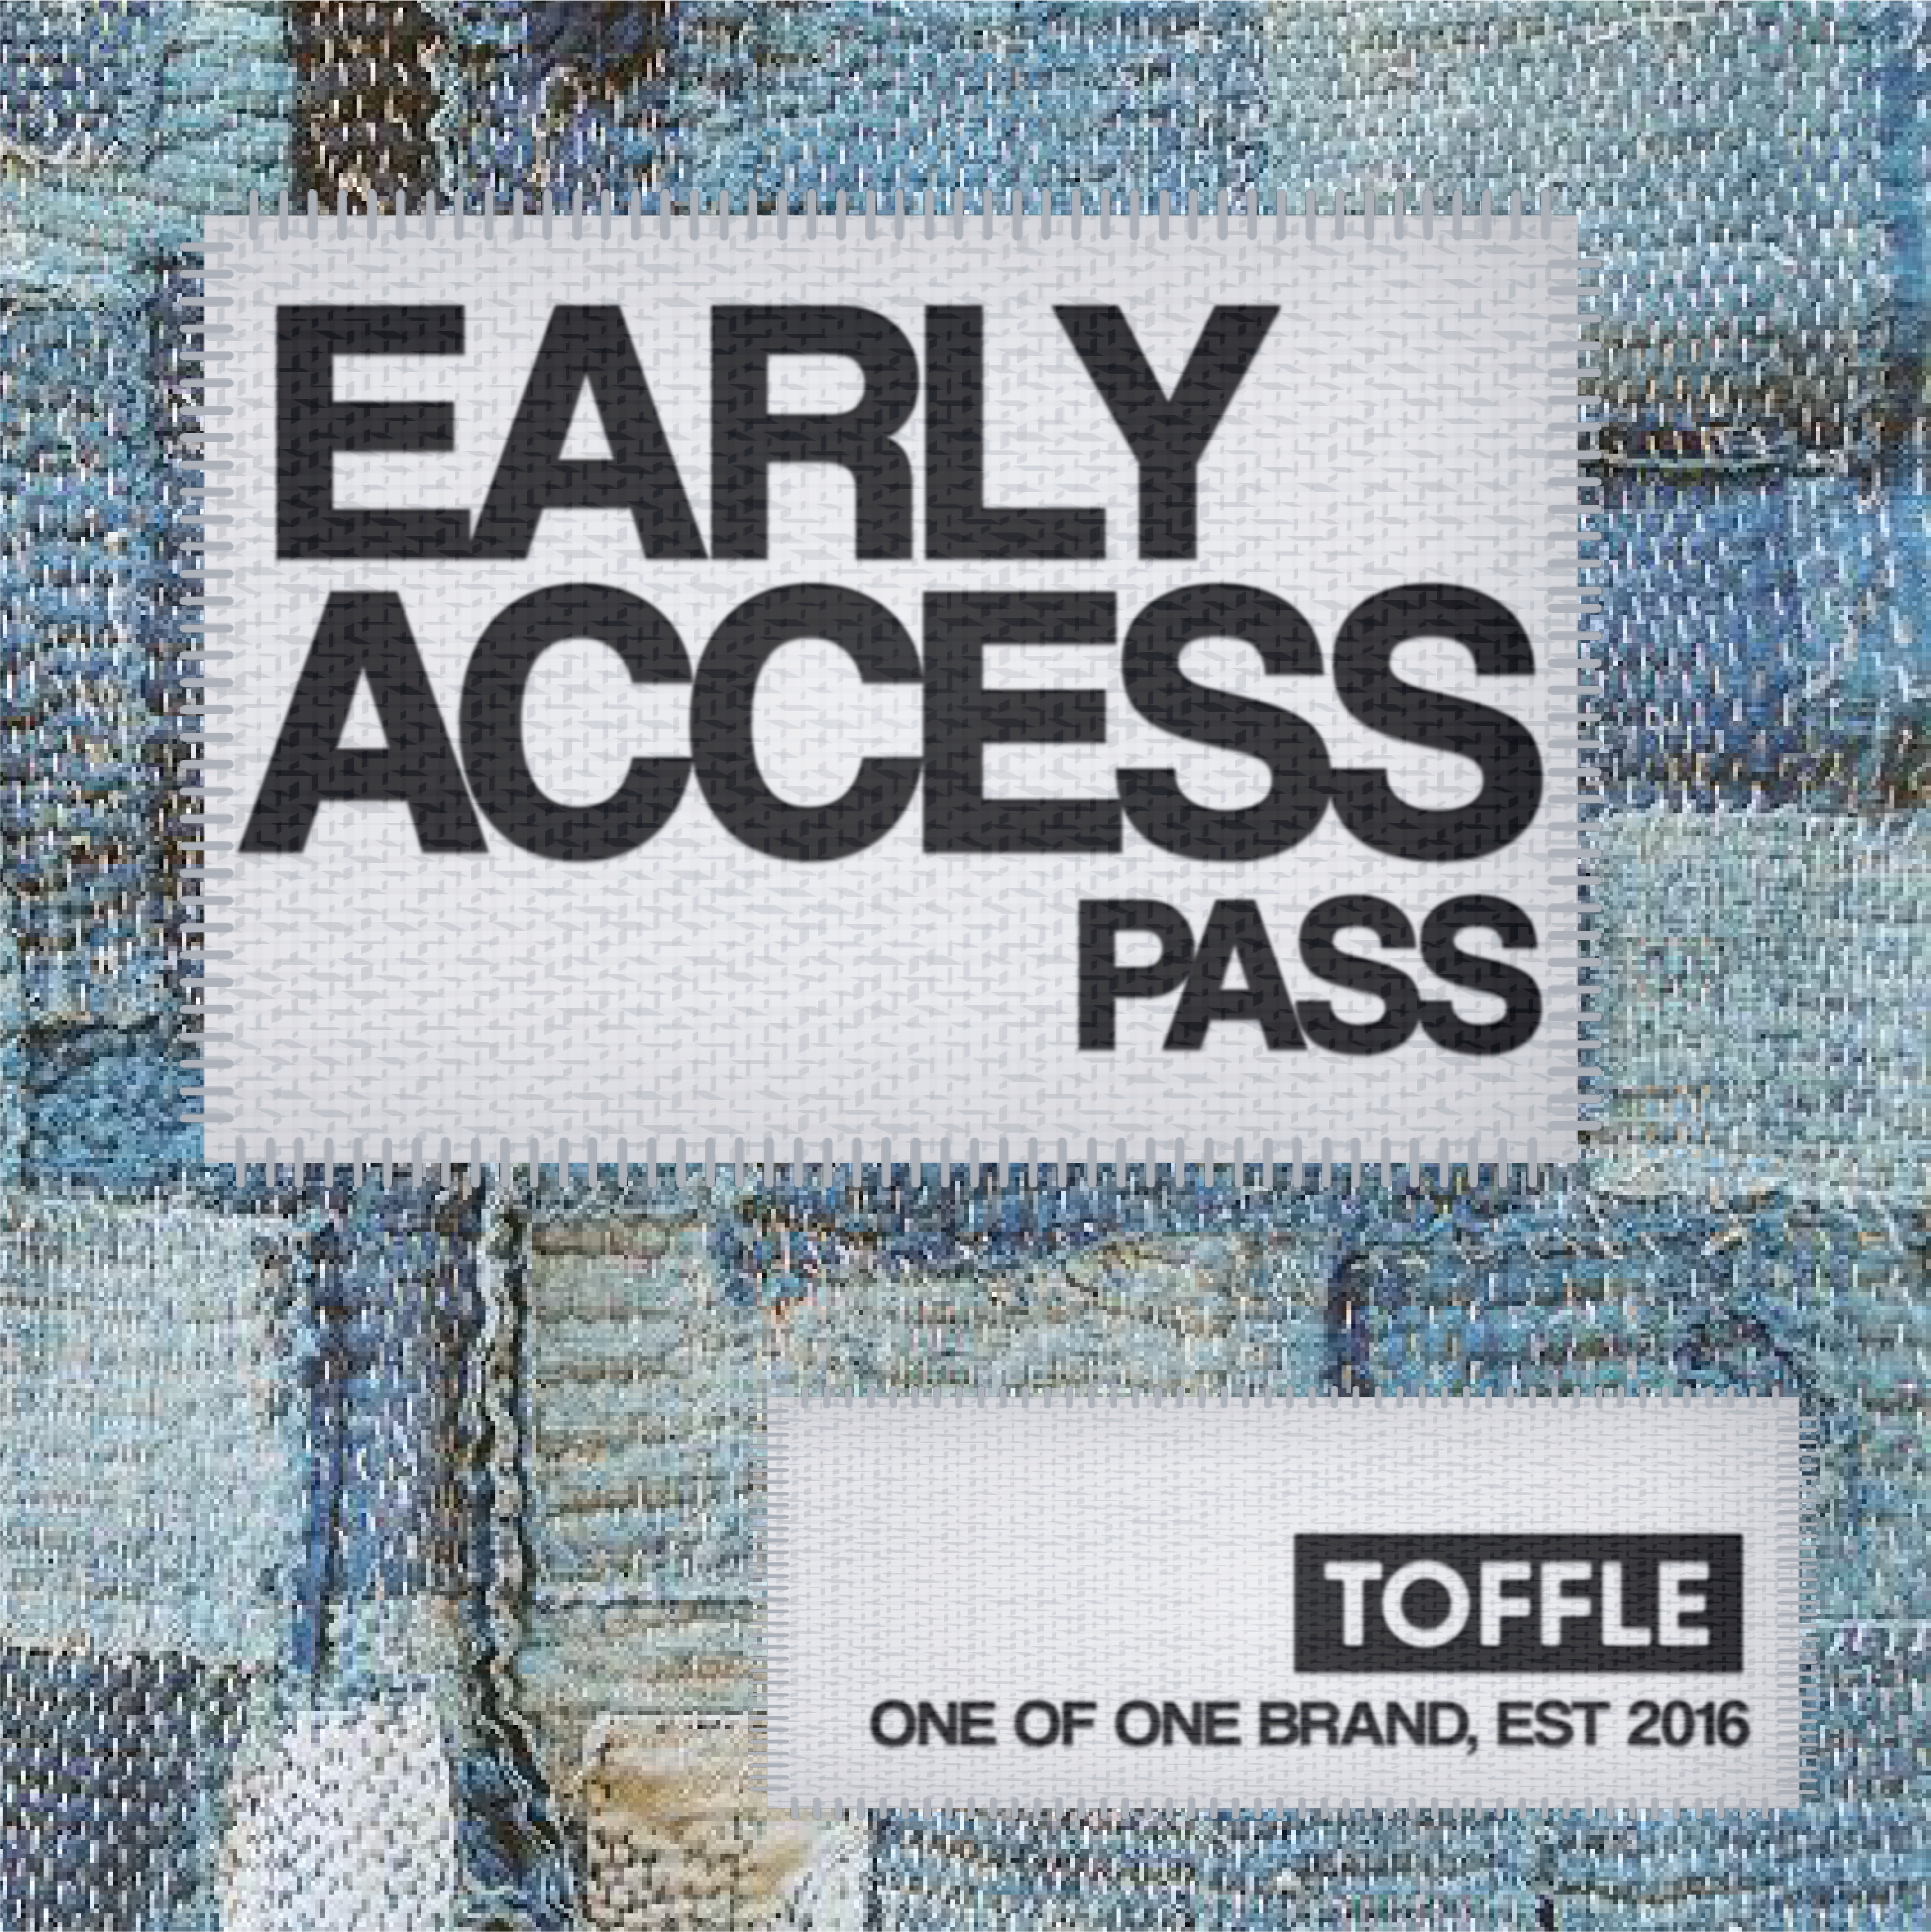 Sale Early Access Pass